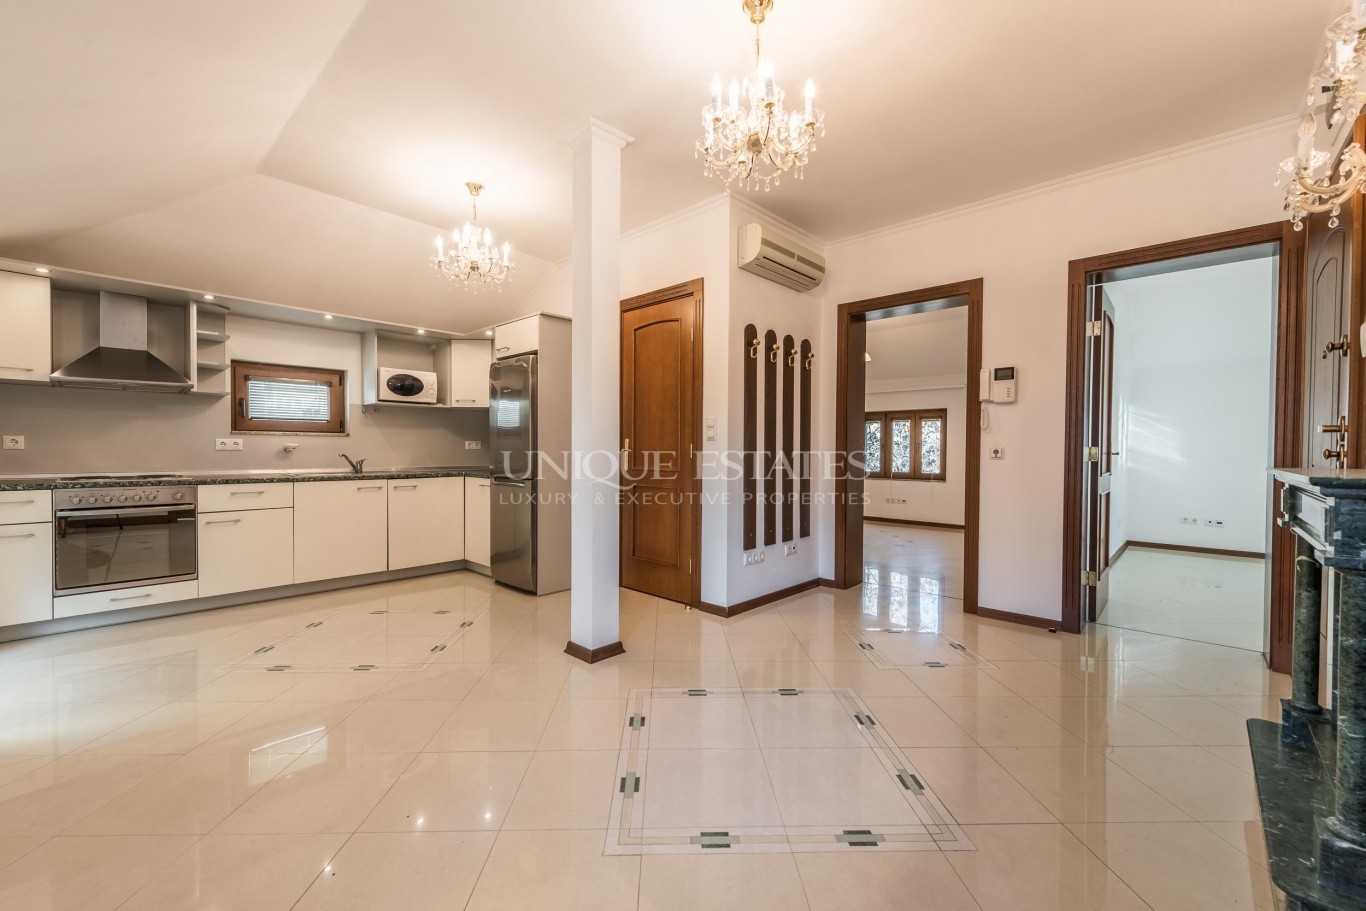 House for rent in Sofia, Downtown with listing ID: K8822 - image 4